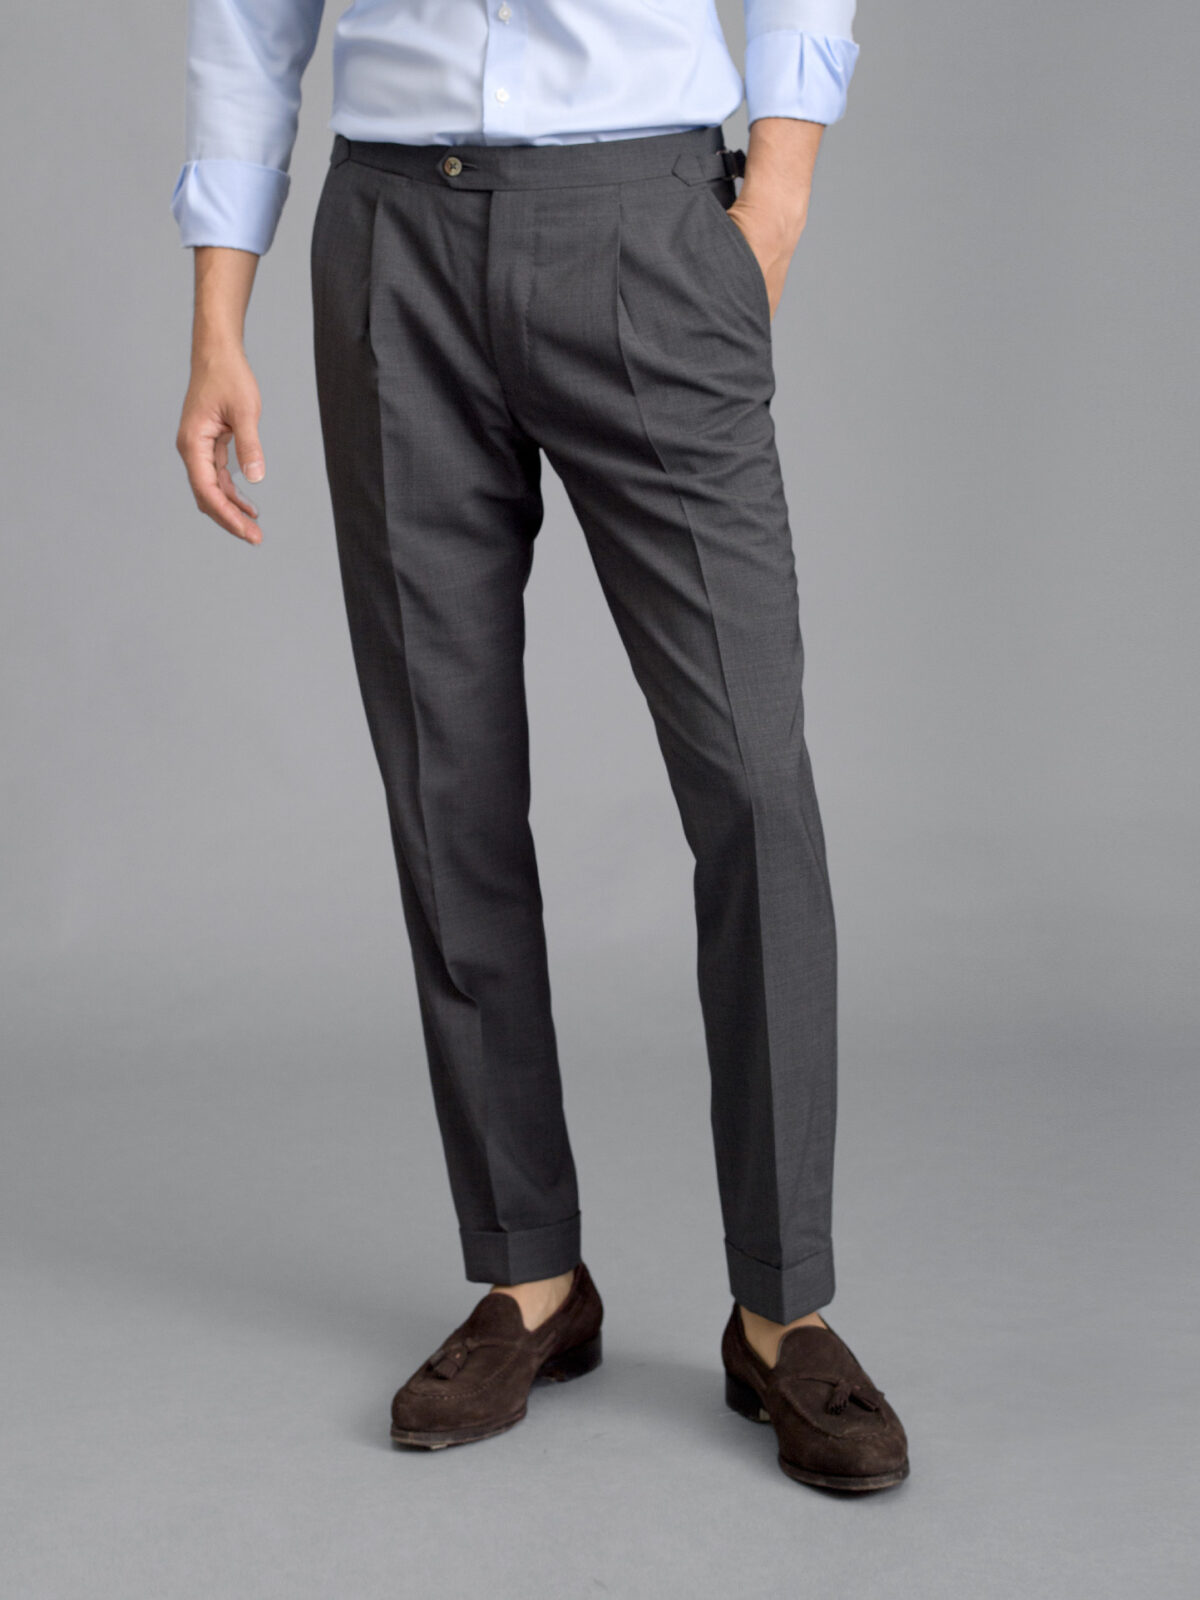 Custom Trouser Design - Business, Casual and Formal - Proper Cloth Help